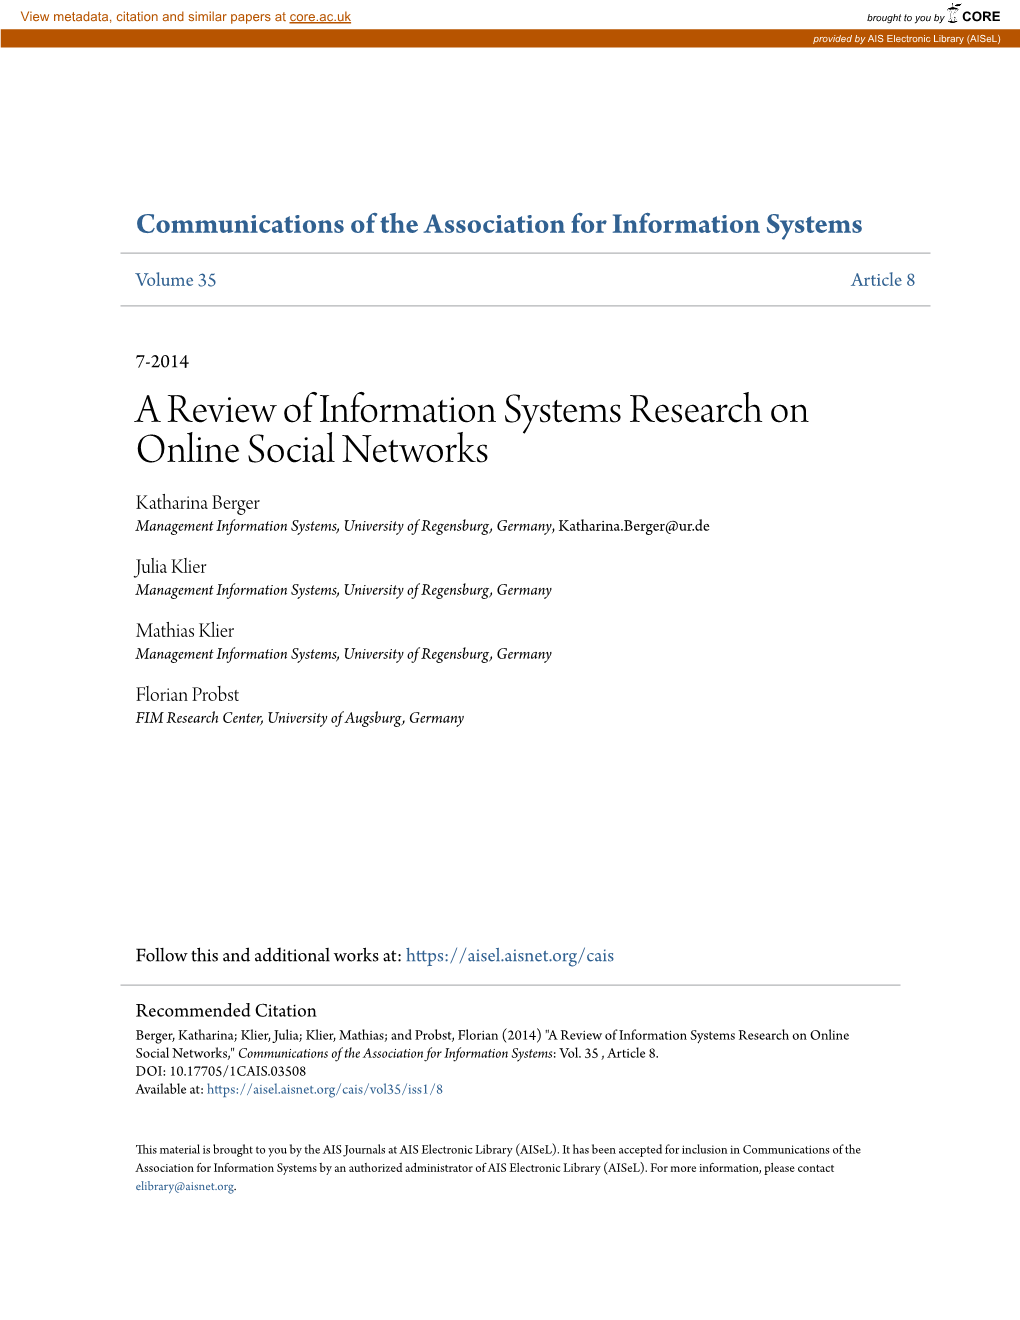 A Review of Information Systems Research on Online Social Networks